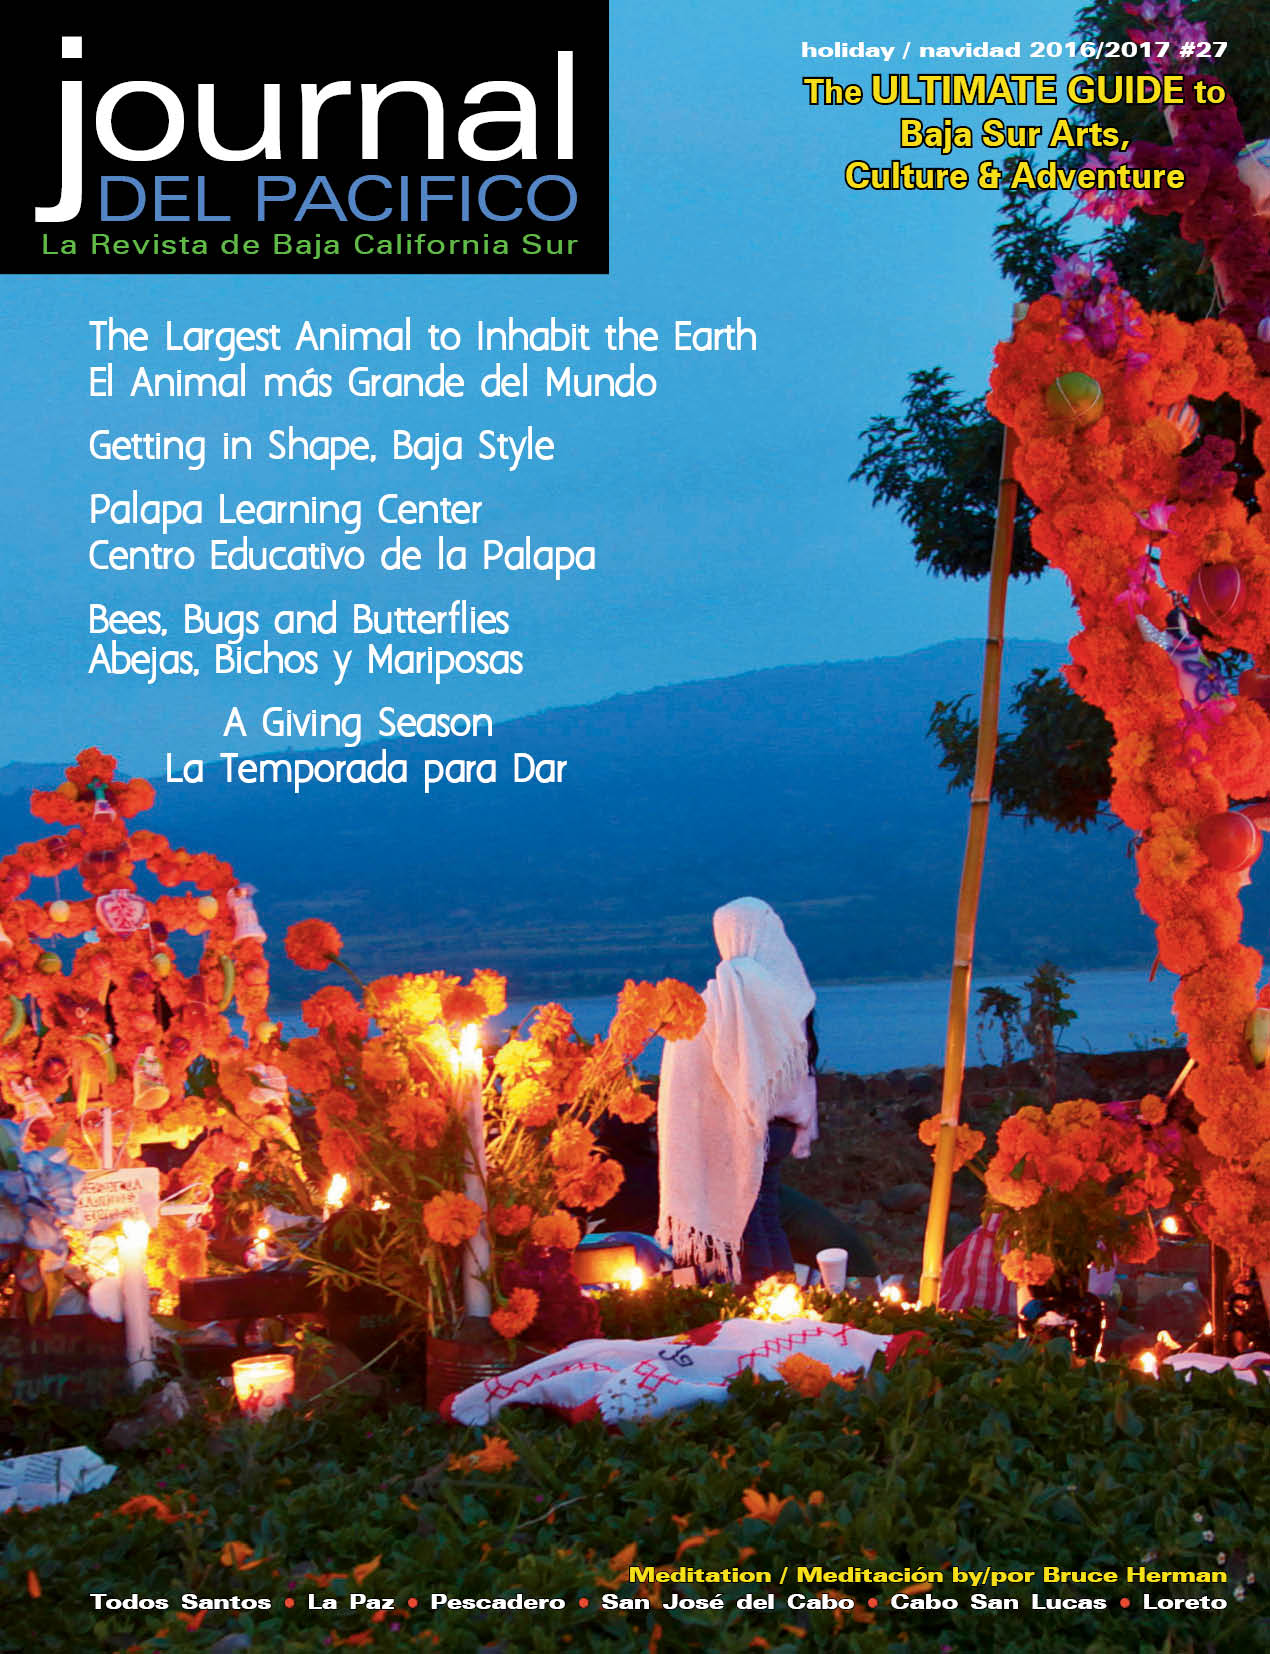 Holiday 2016/2017 Issue of Journal del Pacifico